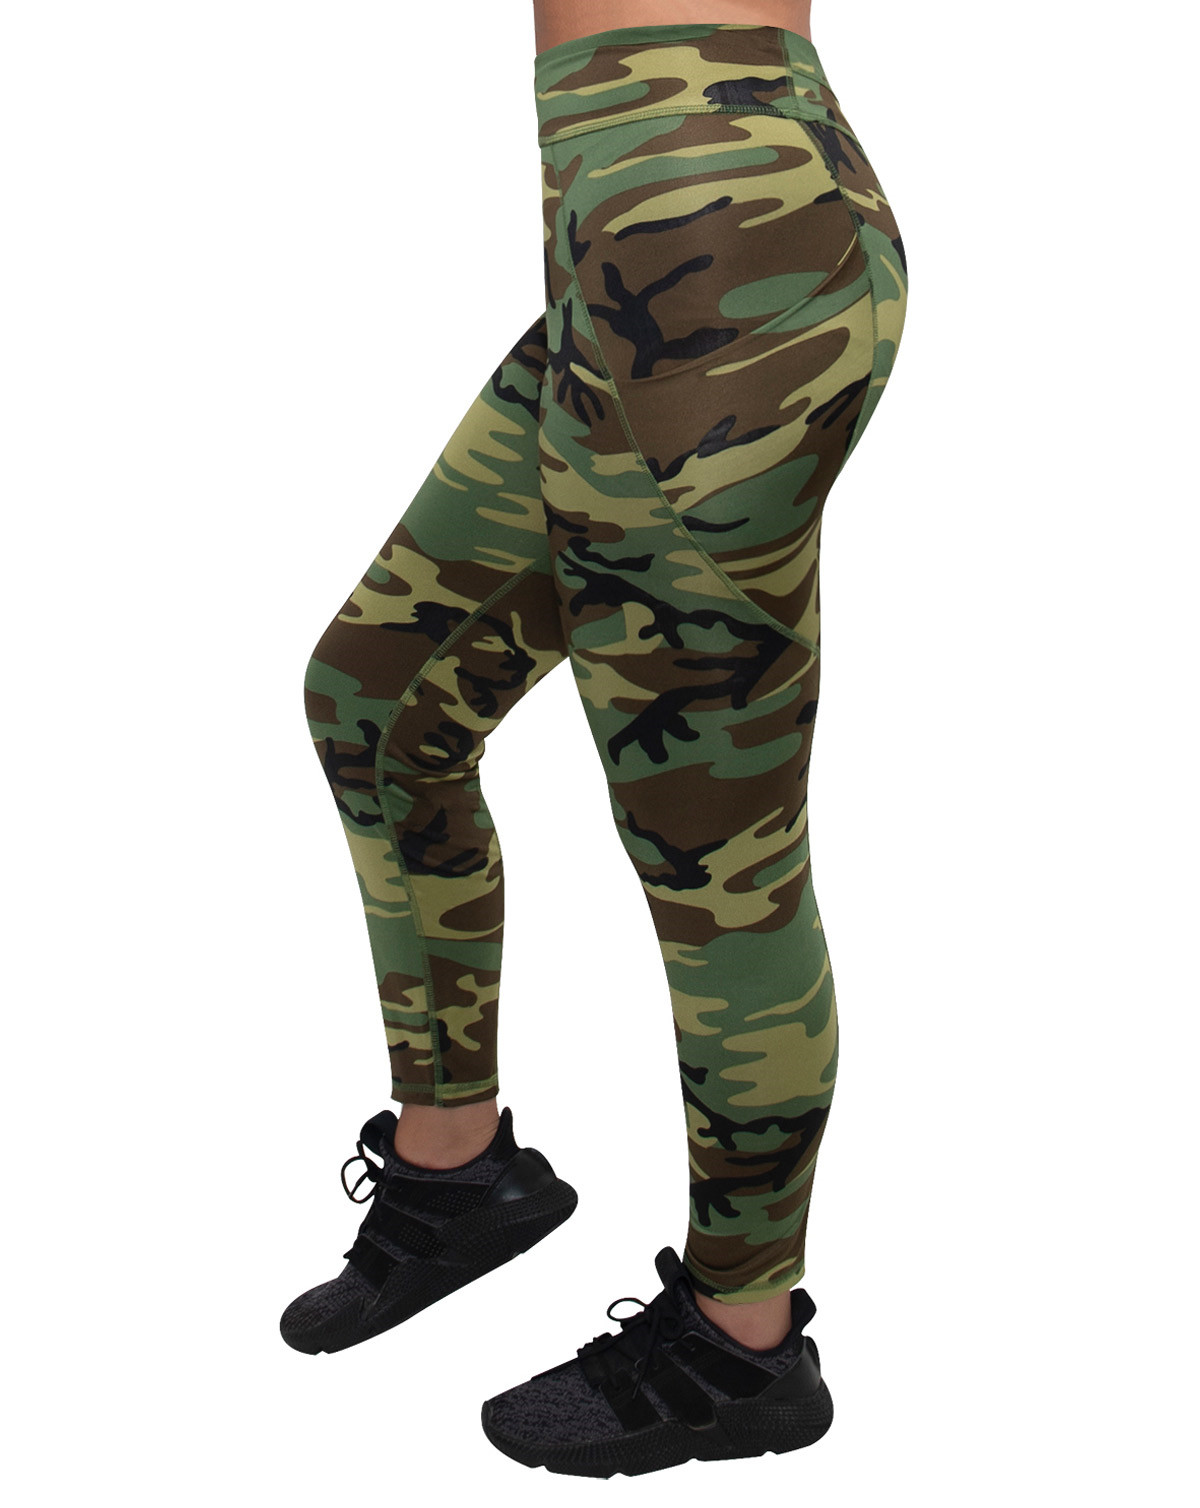 #3 - Rothco Womens Workout Performance Camo Leggings With Pockets (Woodland, XL)